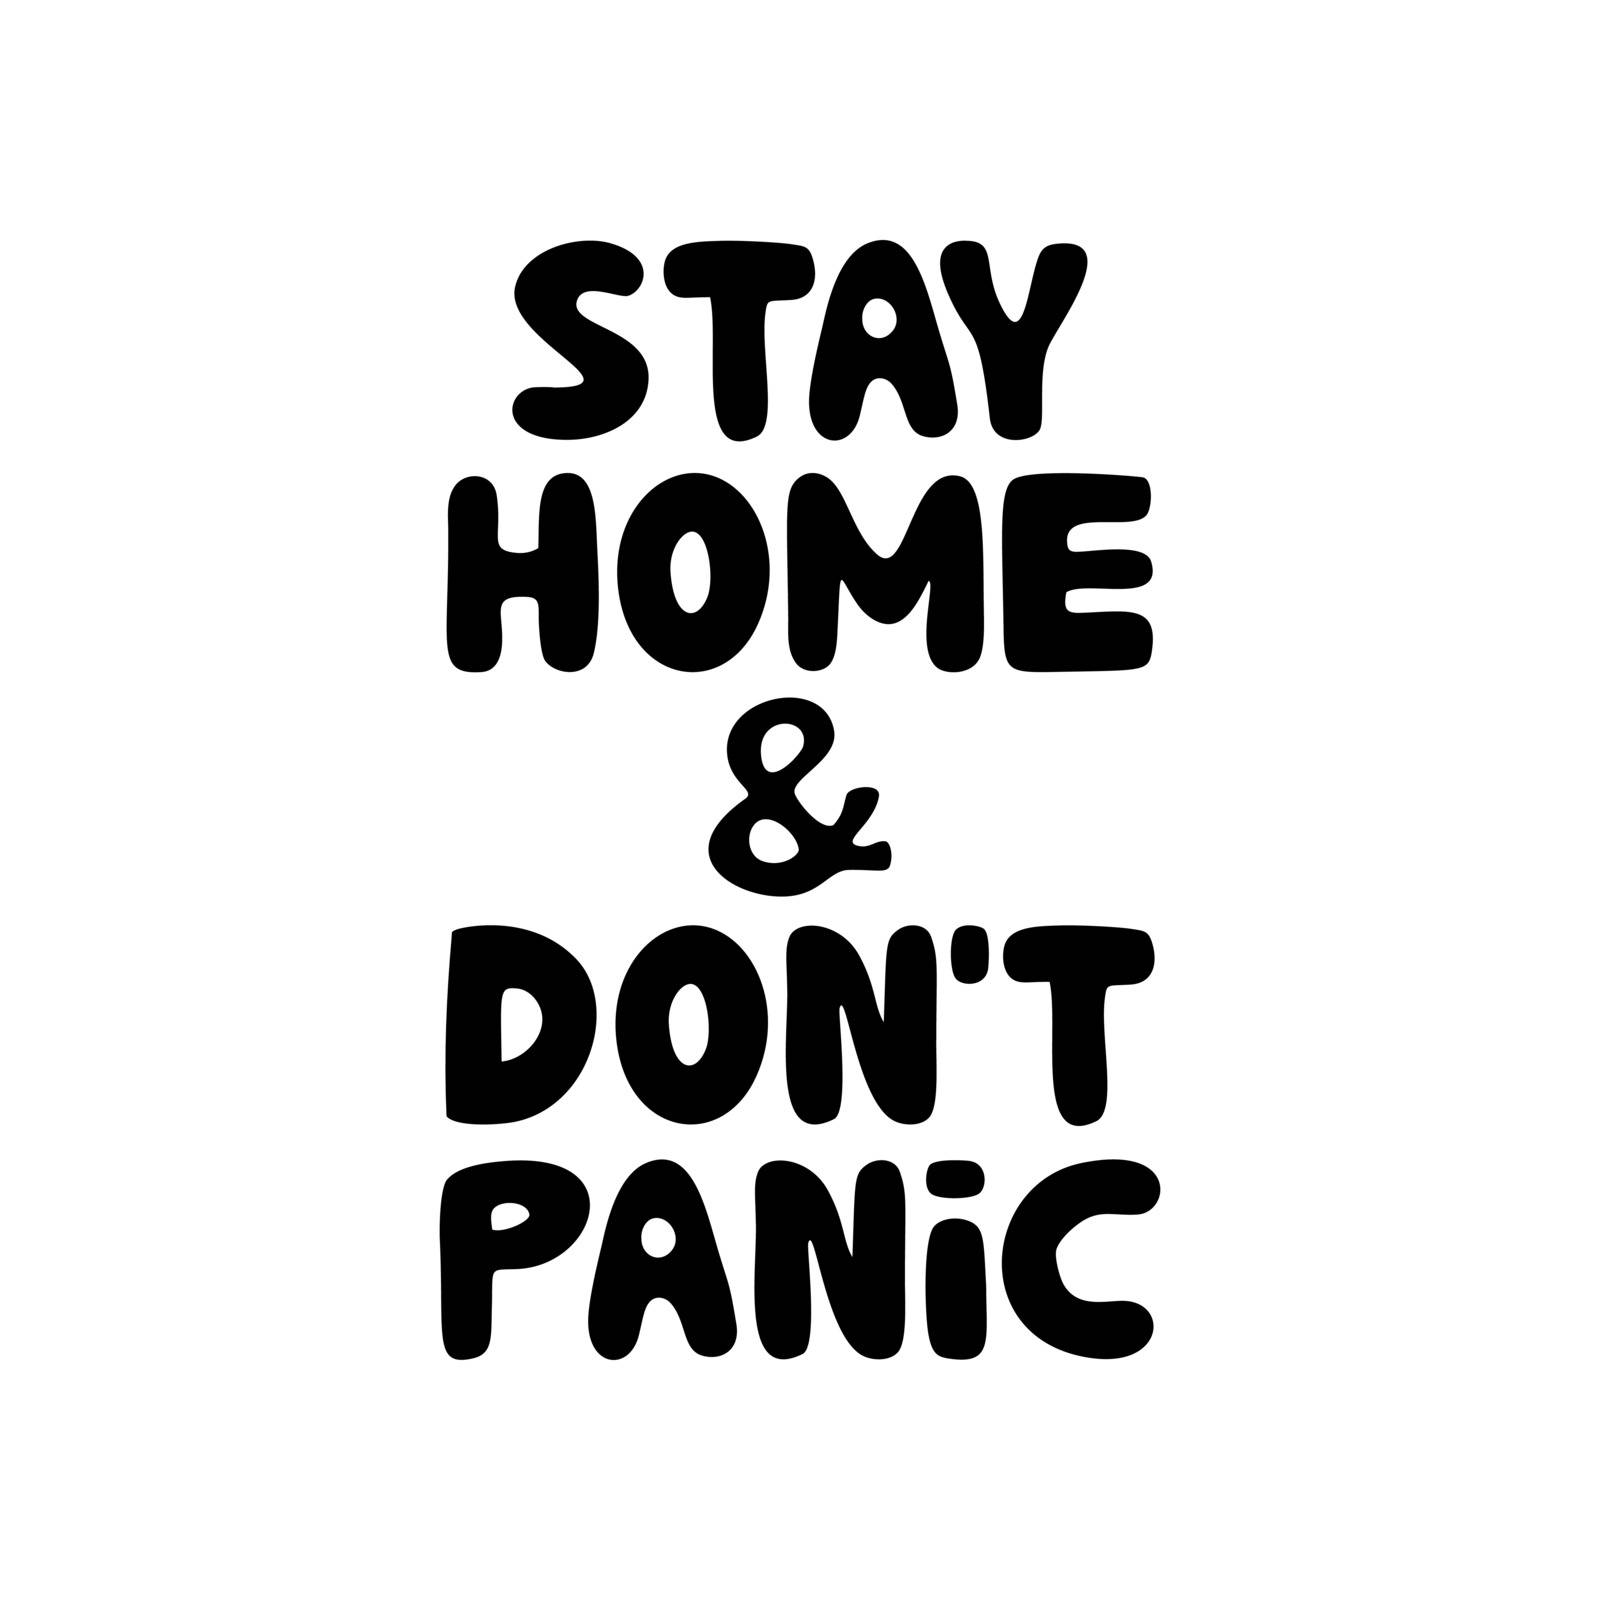 Stay home and do not panic. Cute hand drawn doodle bubble lettering. Isolated on white. Vector stock illustration.